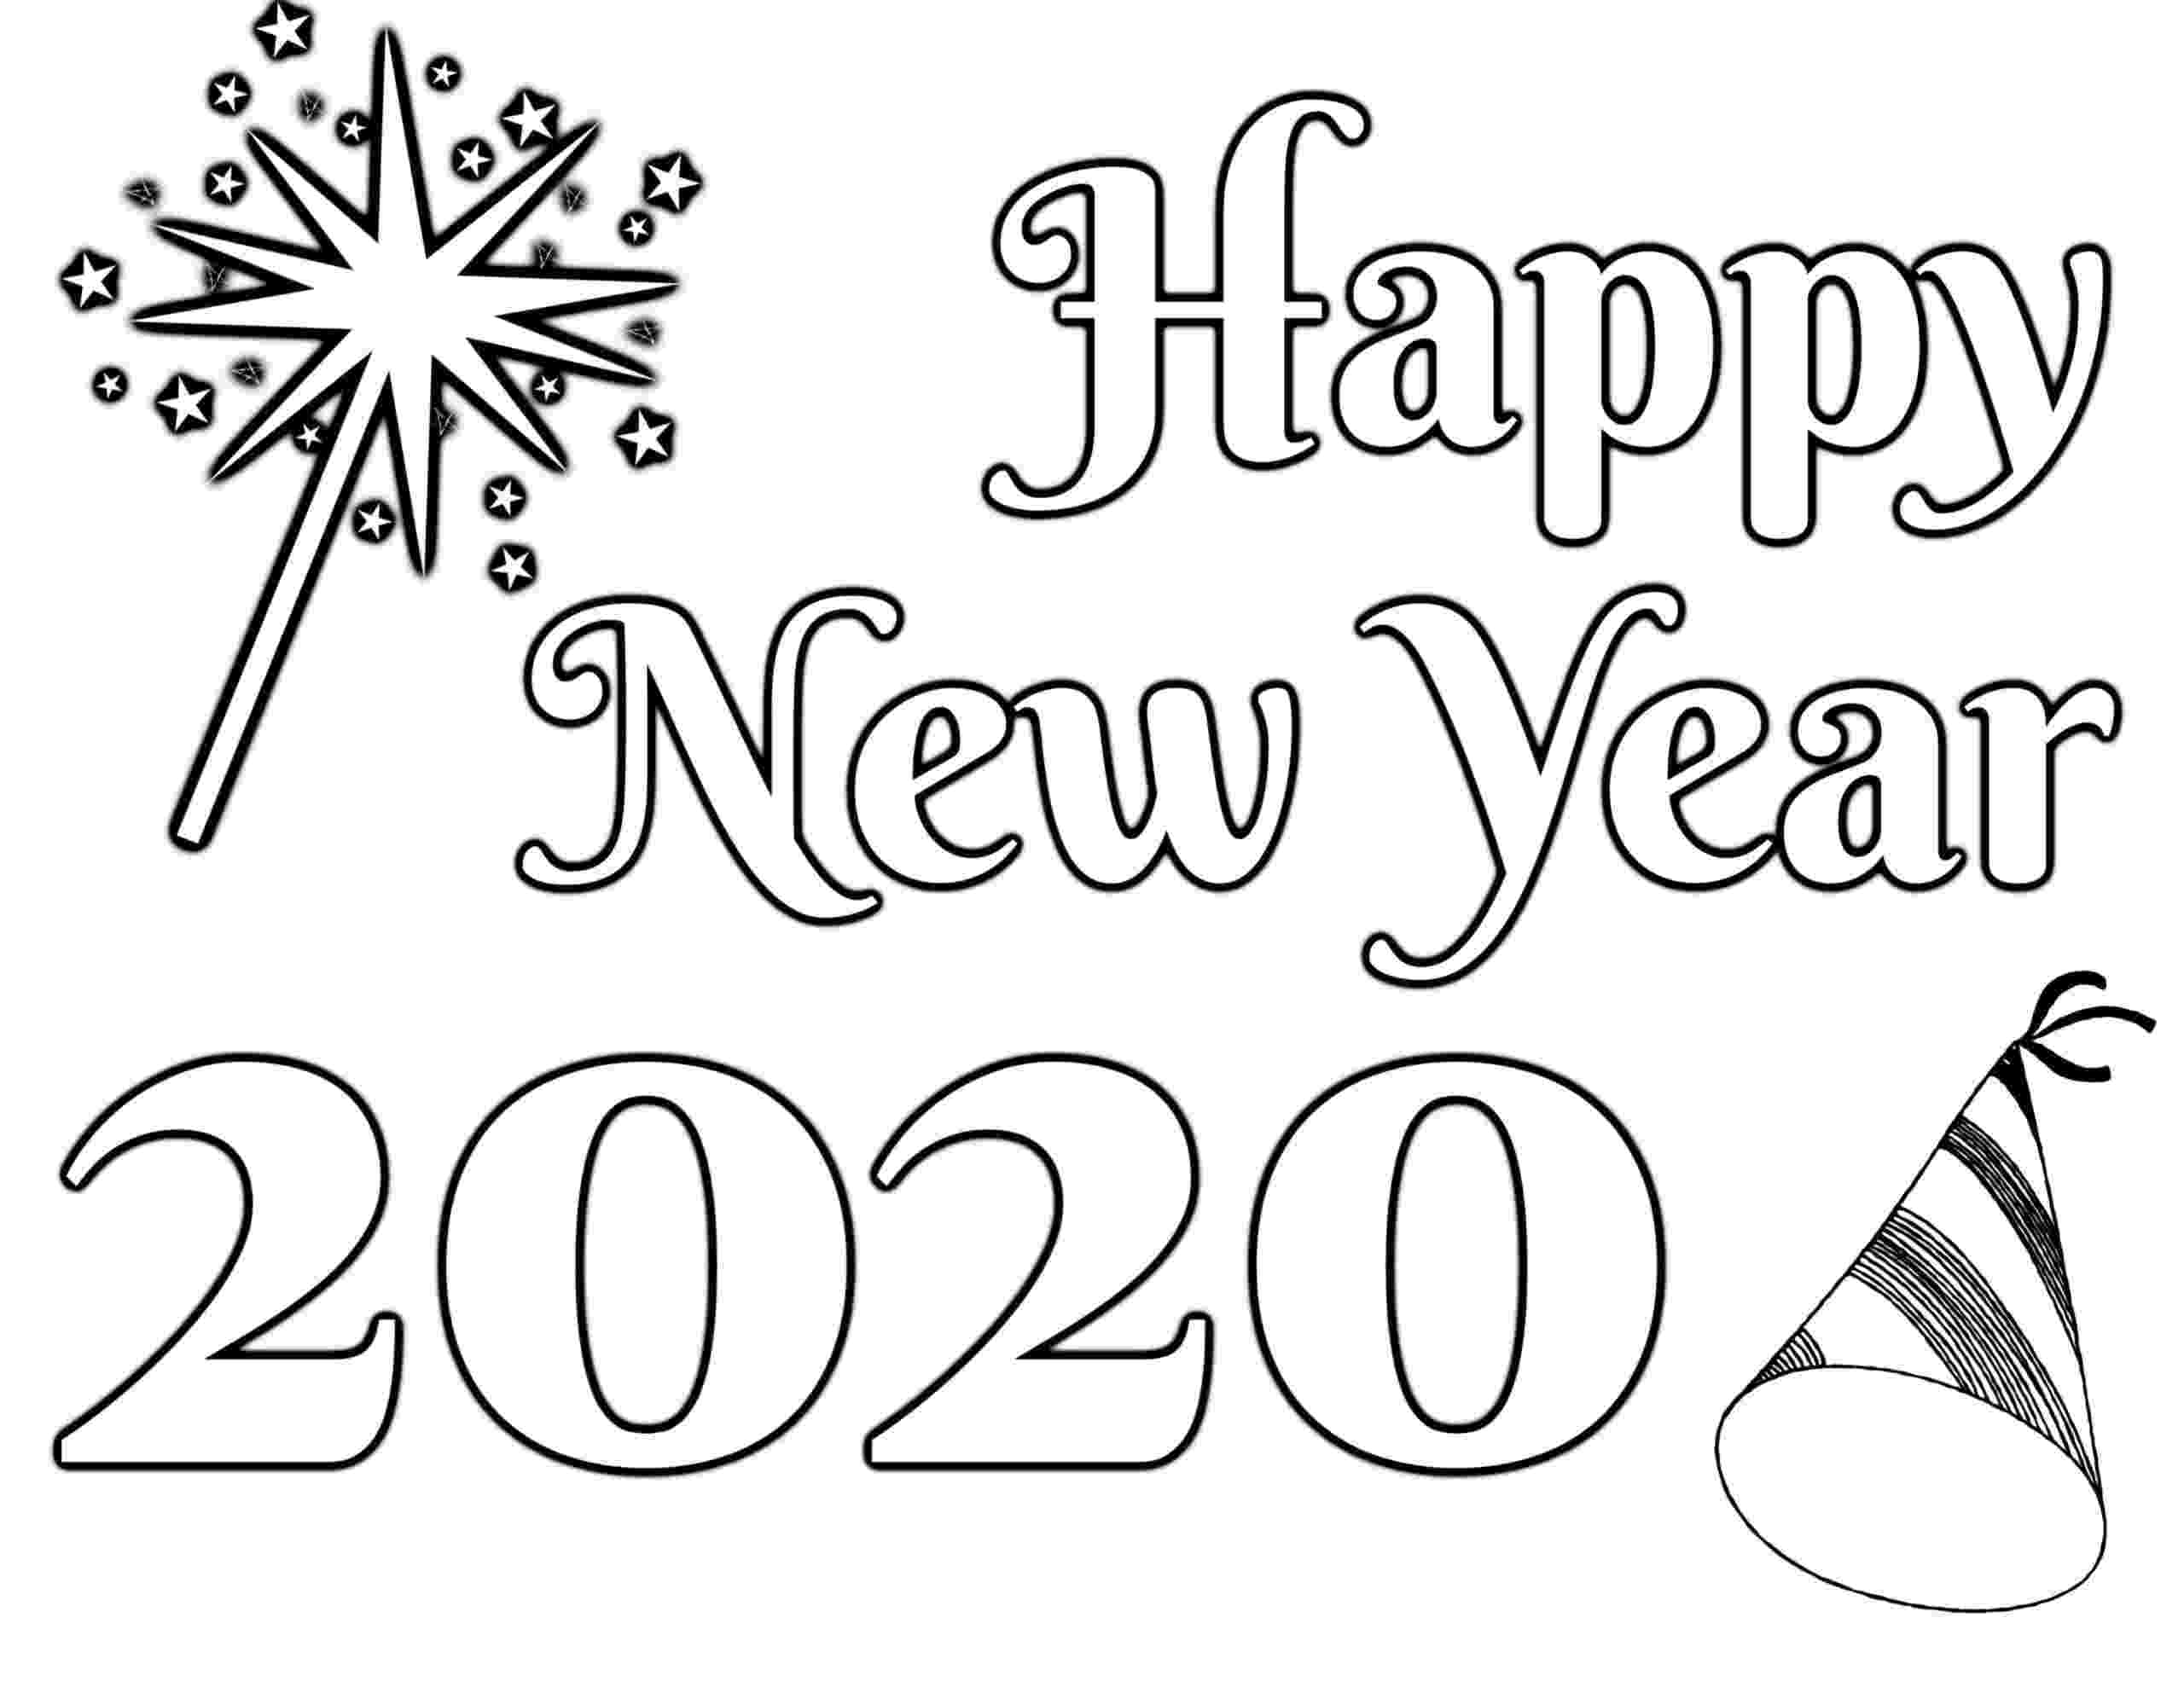 new years coloring page new year39s coloring page 2020 quotlet your light shinequot free coloring new page years 